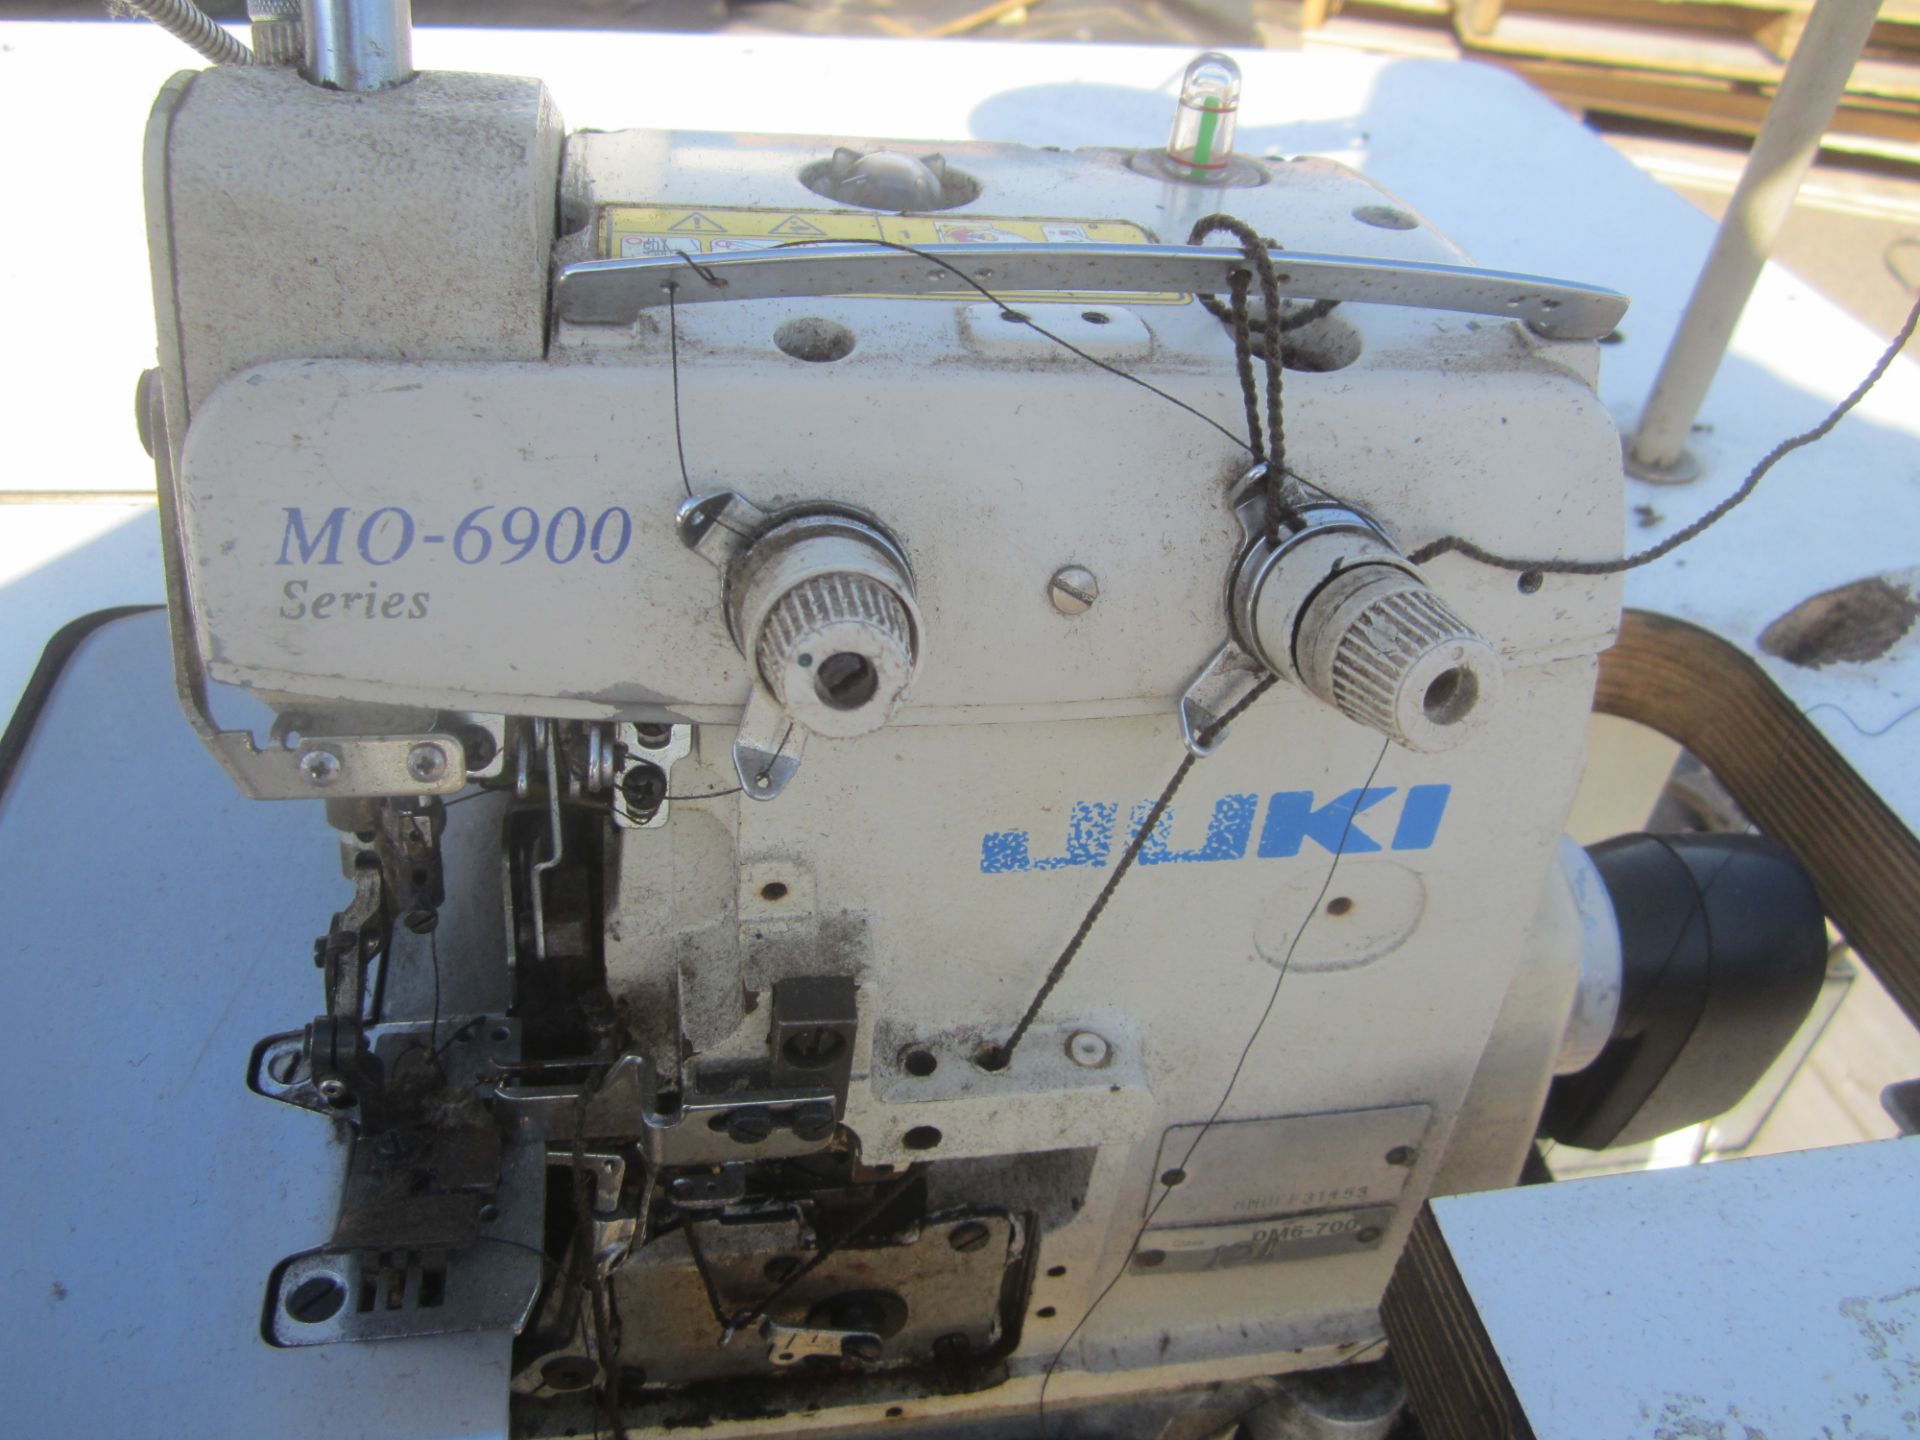 Juki Model MO-6905G Class OM6-700 Industrial Sewing Machine, s/n 8MOEF31153, with Elka Electronic - Image 2 of 6